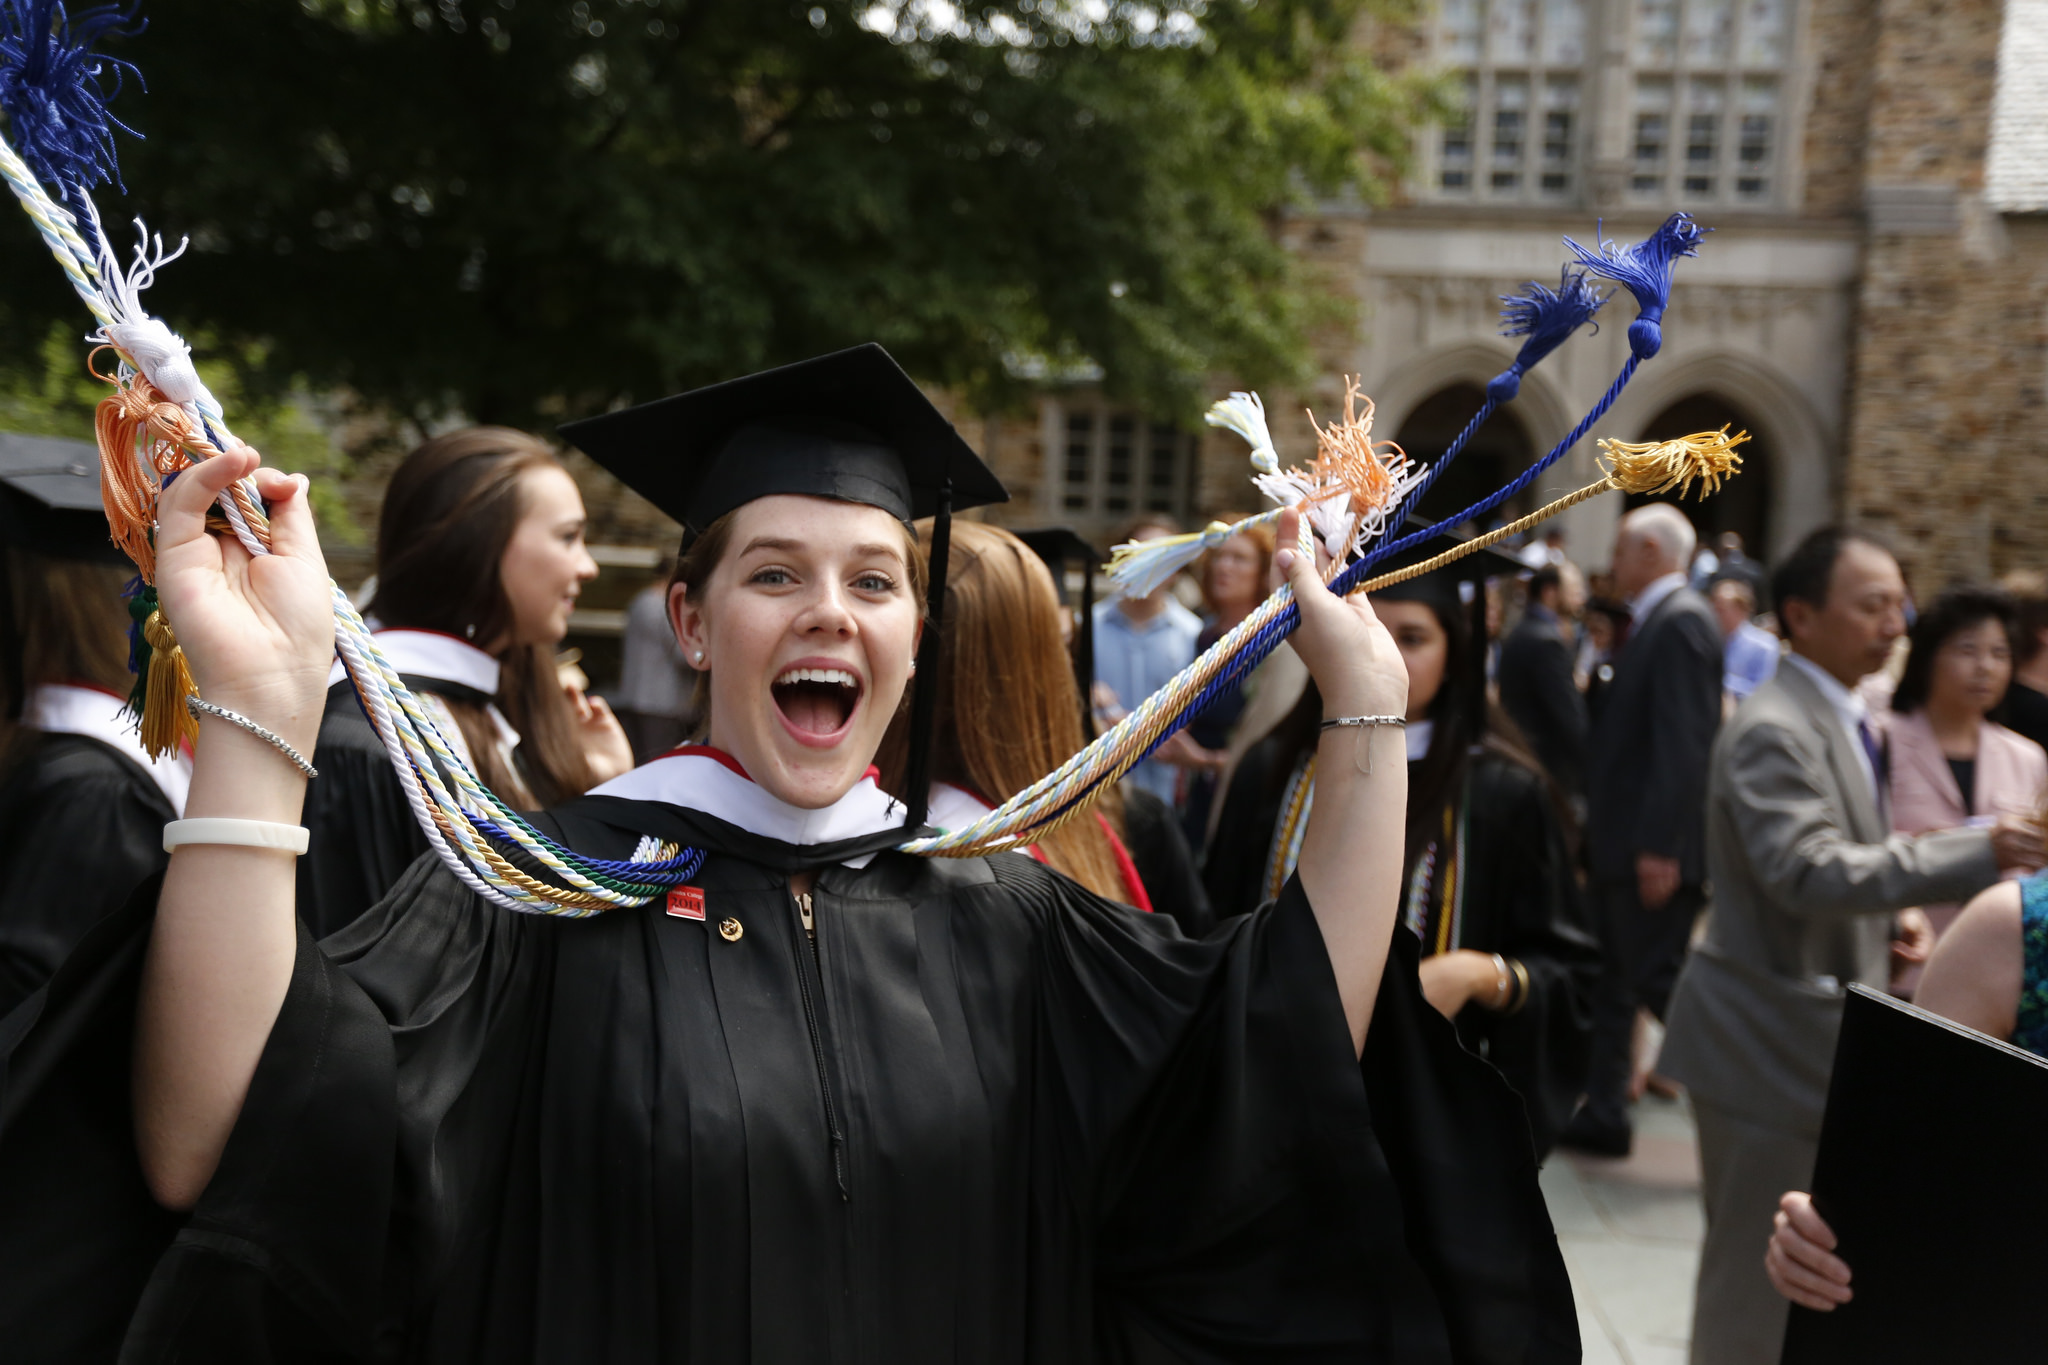 An excited student in graduation regalia smiles at the camera